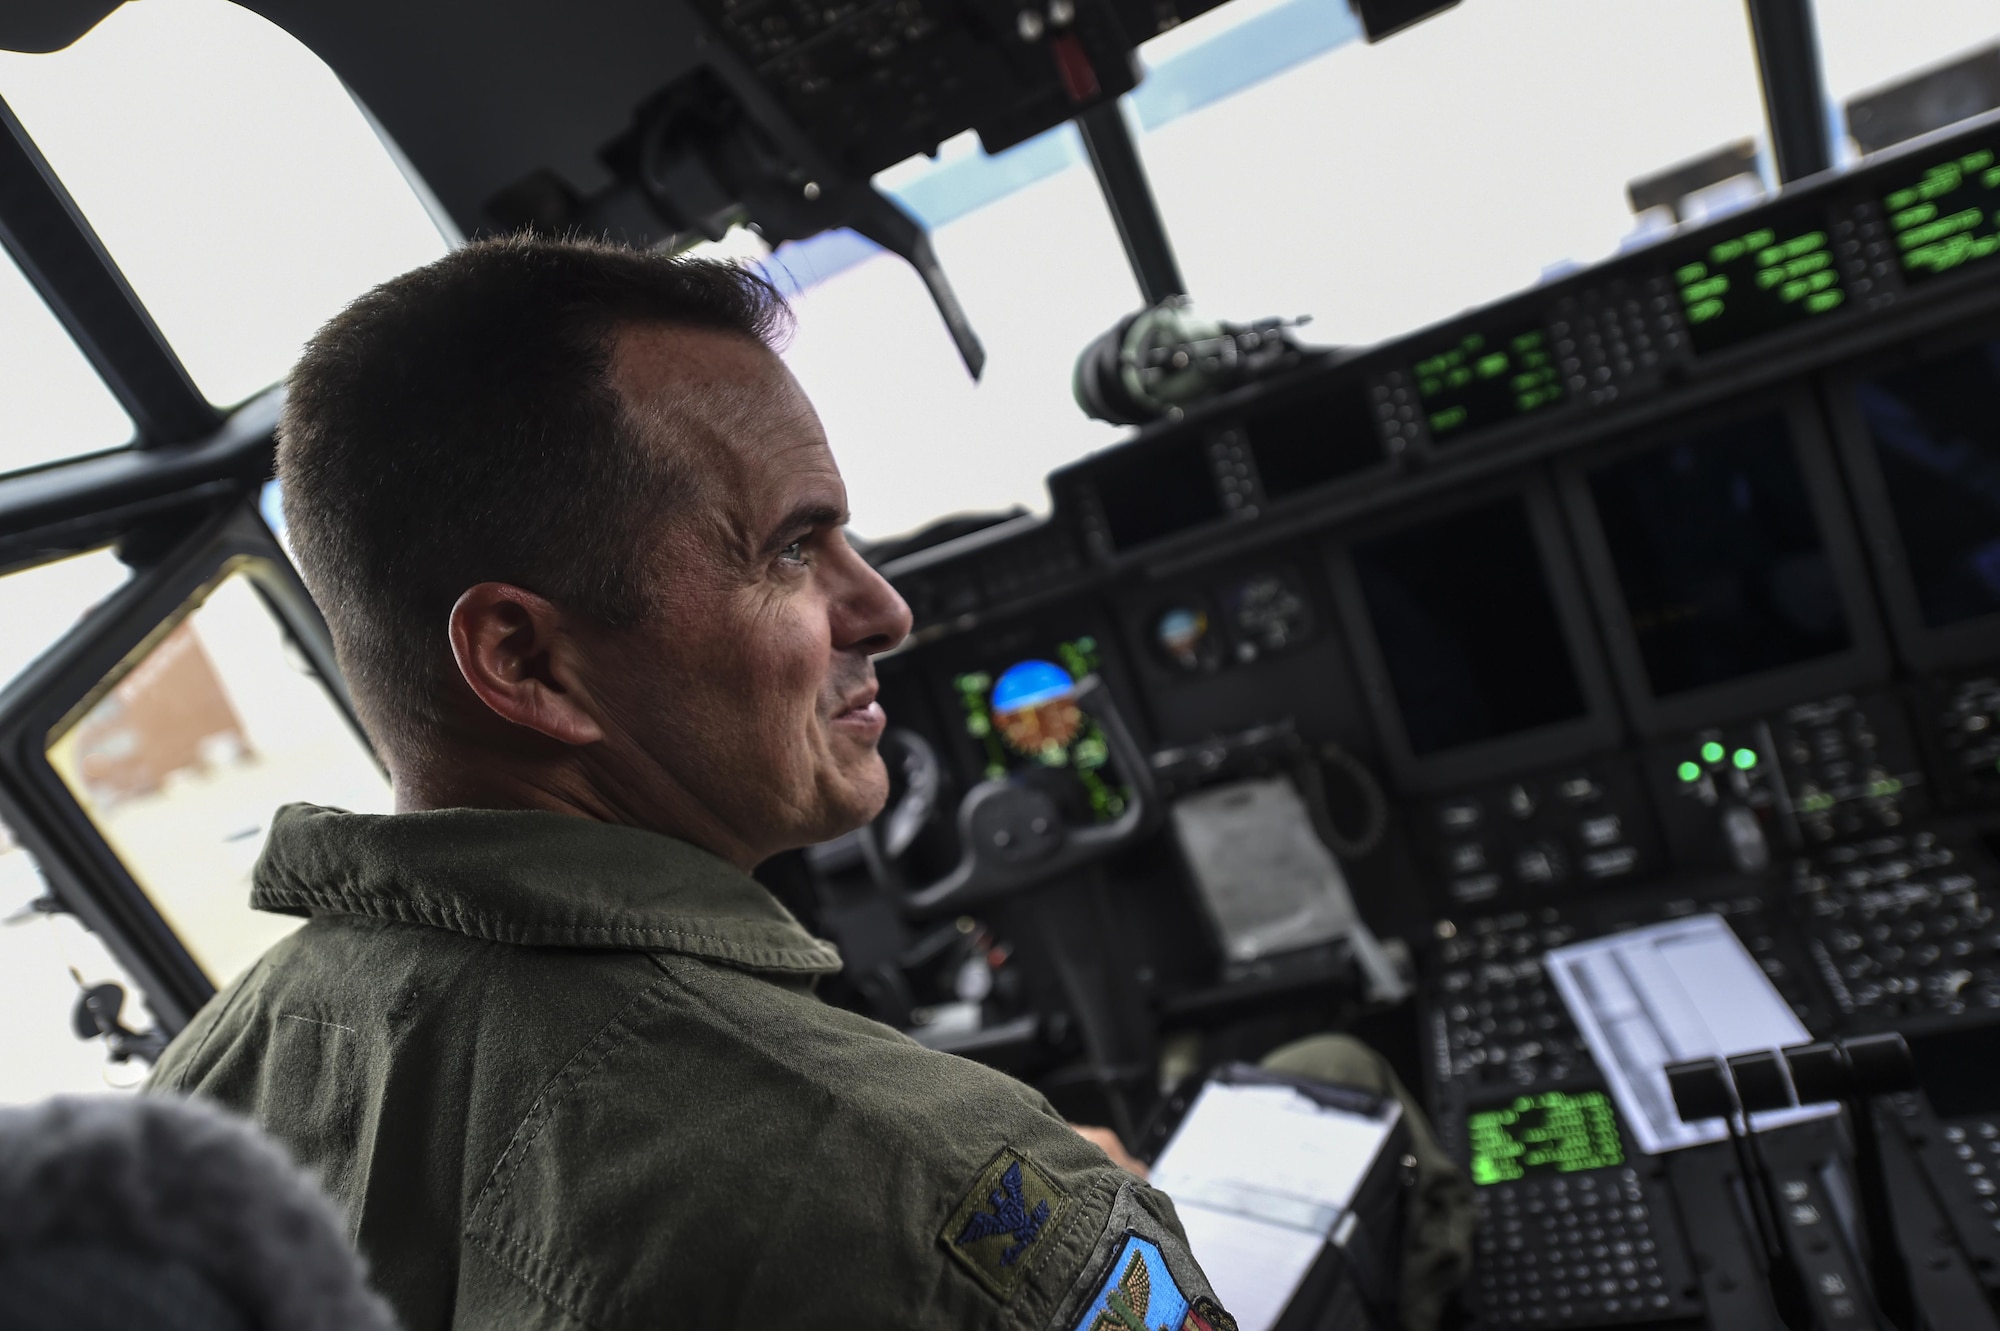 Col. Sean Farrell, commander of the 1st Special Operations Wing, undergoes preflight checks of an MC-130J Combat Talon II at Lockheed Martin in Marietta, Ga., Dec. 11, 2015. The MC-130J will undergo modifications to become an AC-130J Ghostrider, which will provide the 1 SOW with close air support and air interdiction capabilities. (U.S. Air Force photo by Senior Airman Ryan Conroy)